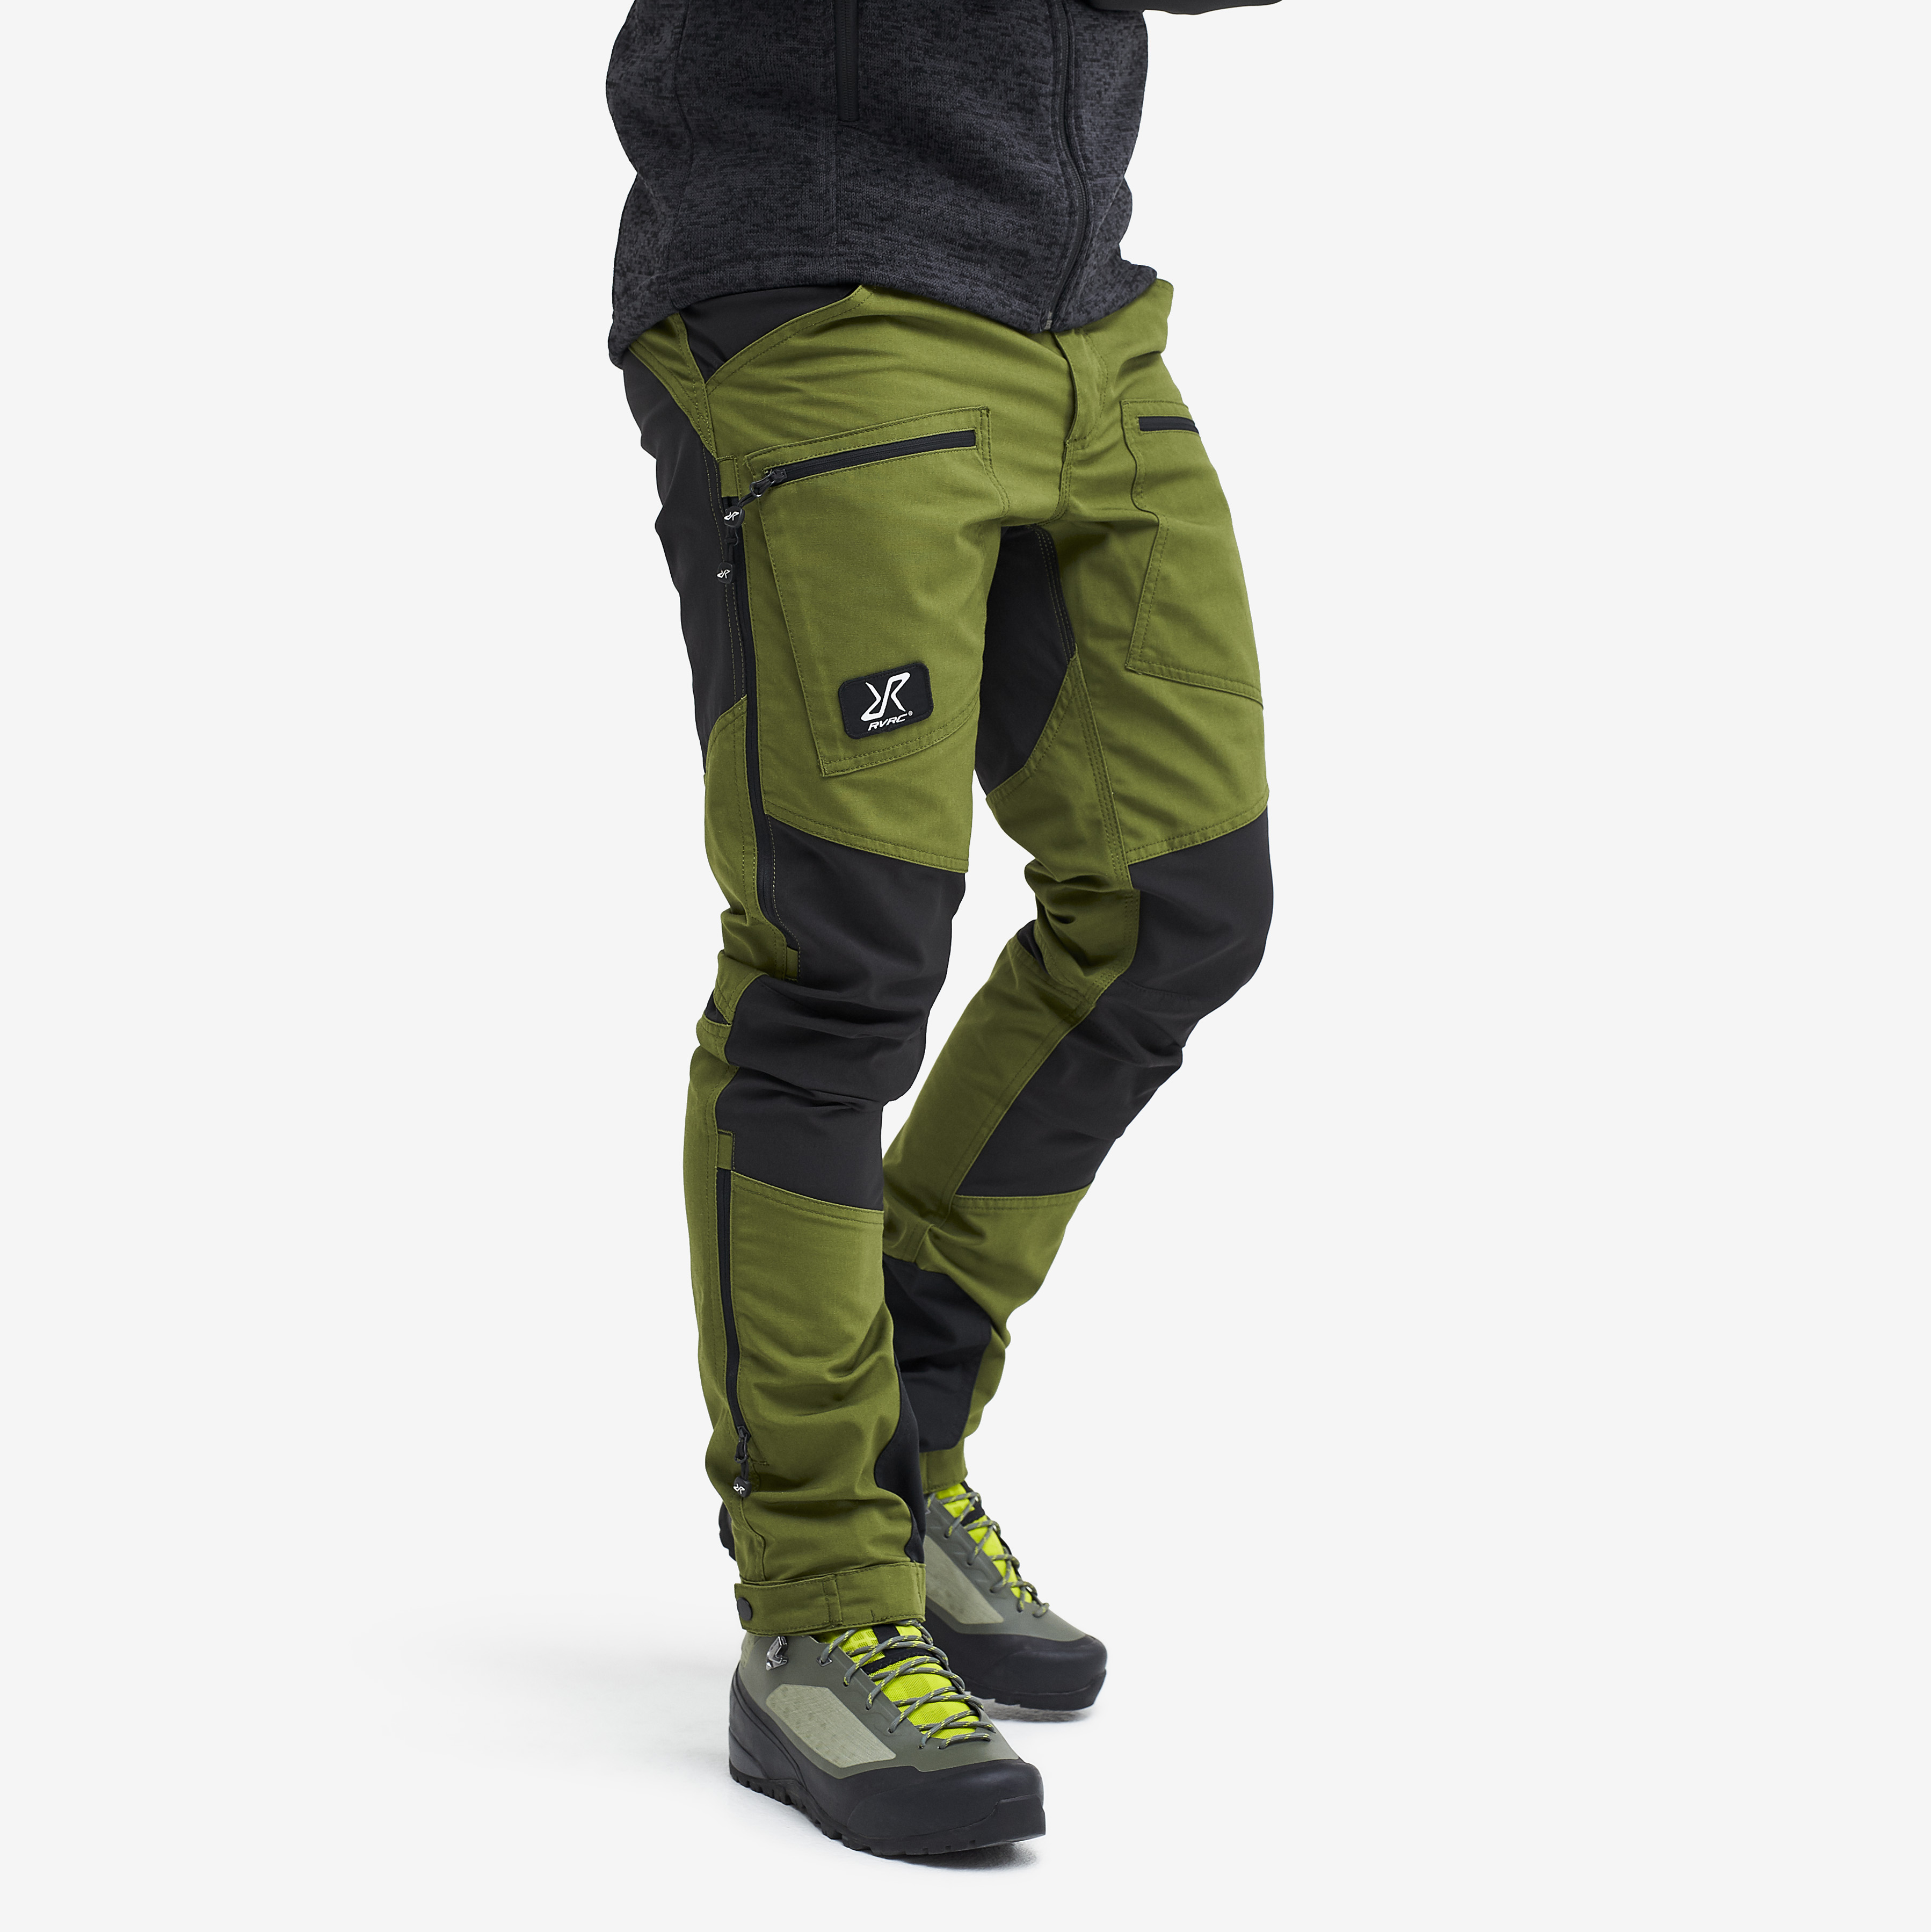 Nordwand Pro Rescue Pants Cactus Green Uomo